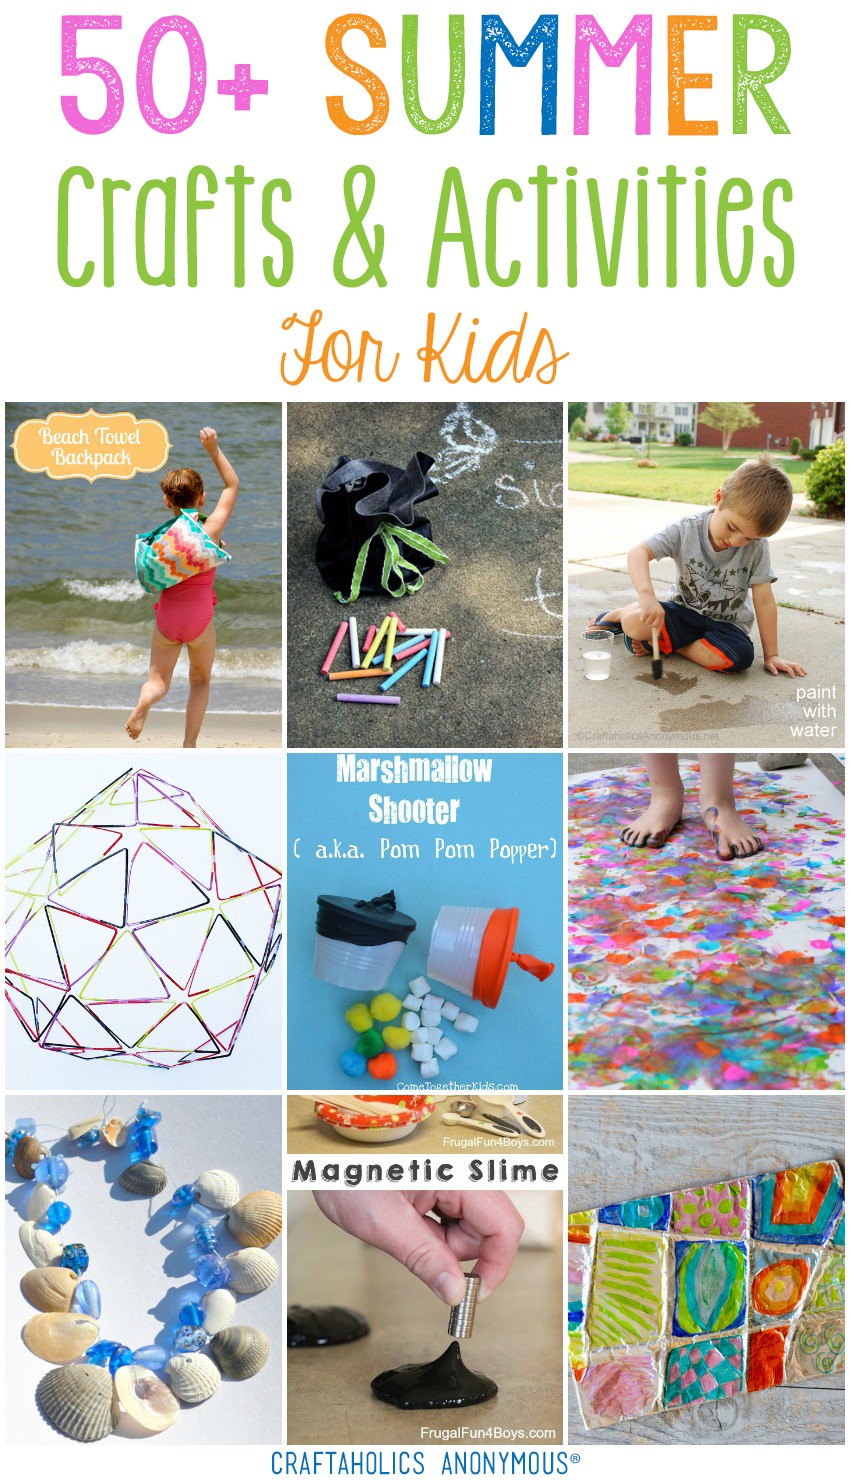 Egg Head Grass - Things to Make and Do, Crafts and Activities for Kids -  The Crafty Crow